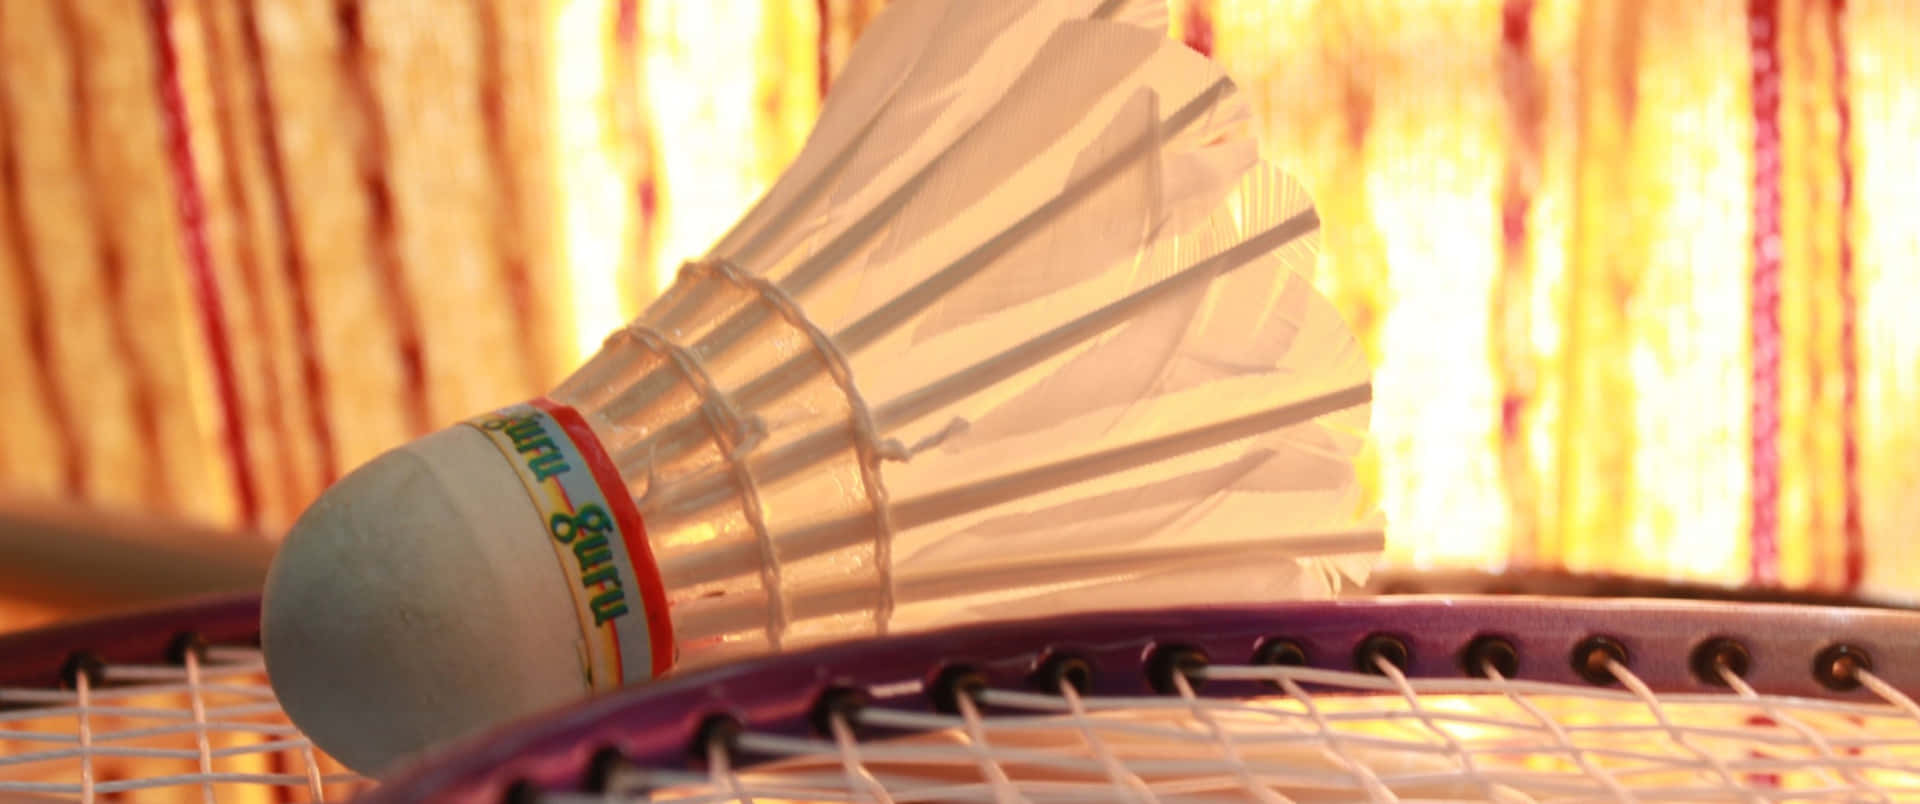 Take your badminton skills to the next level with this 3440x1440p badminton background!